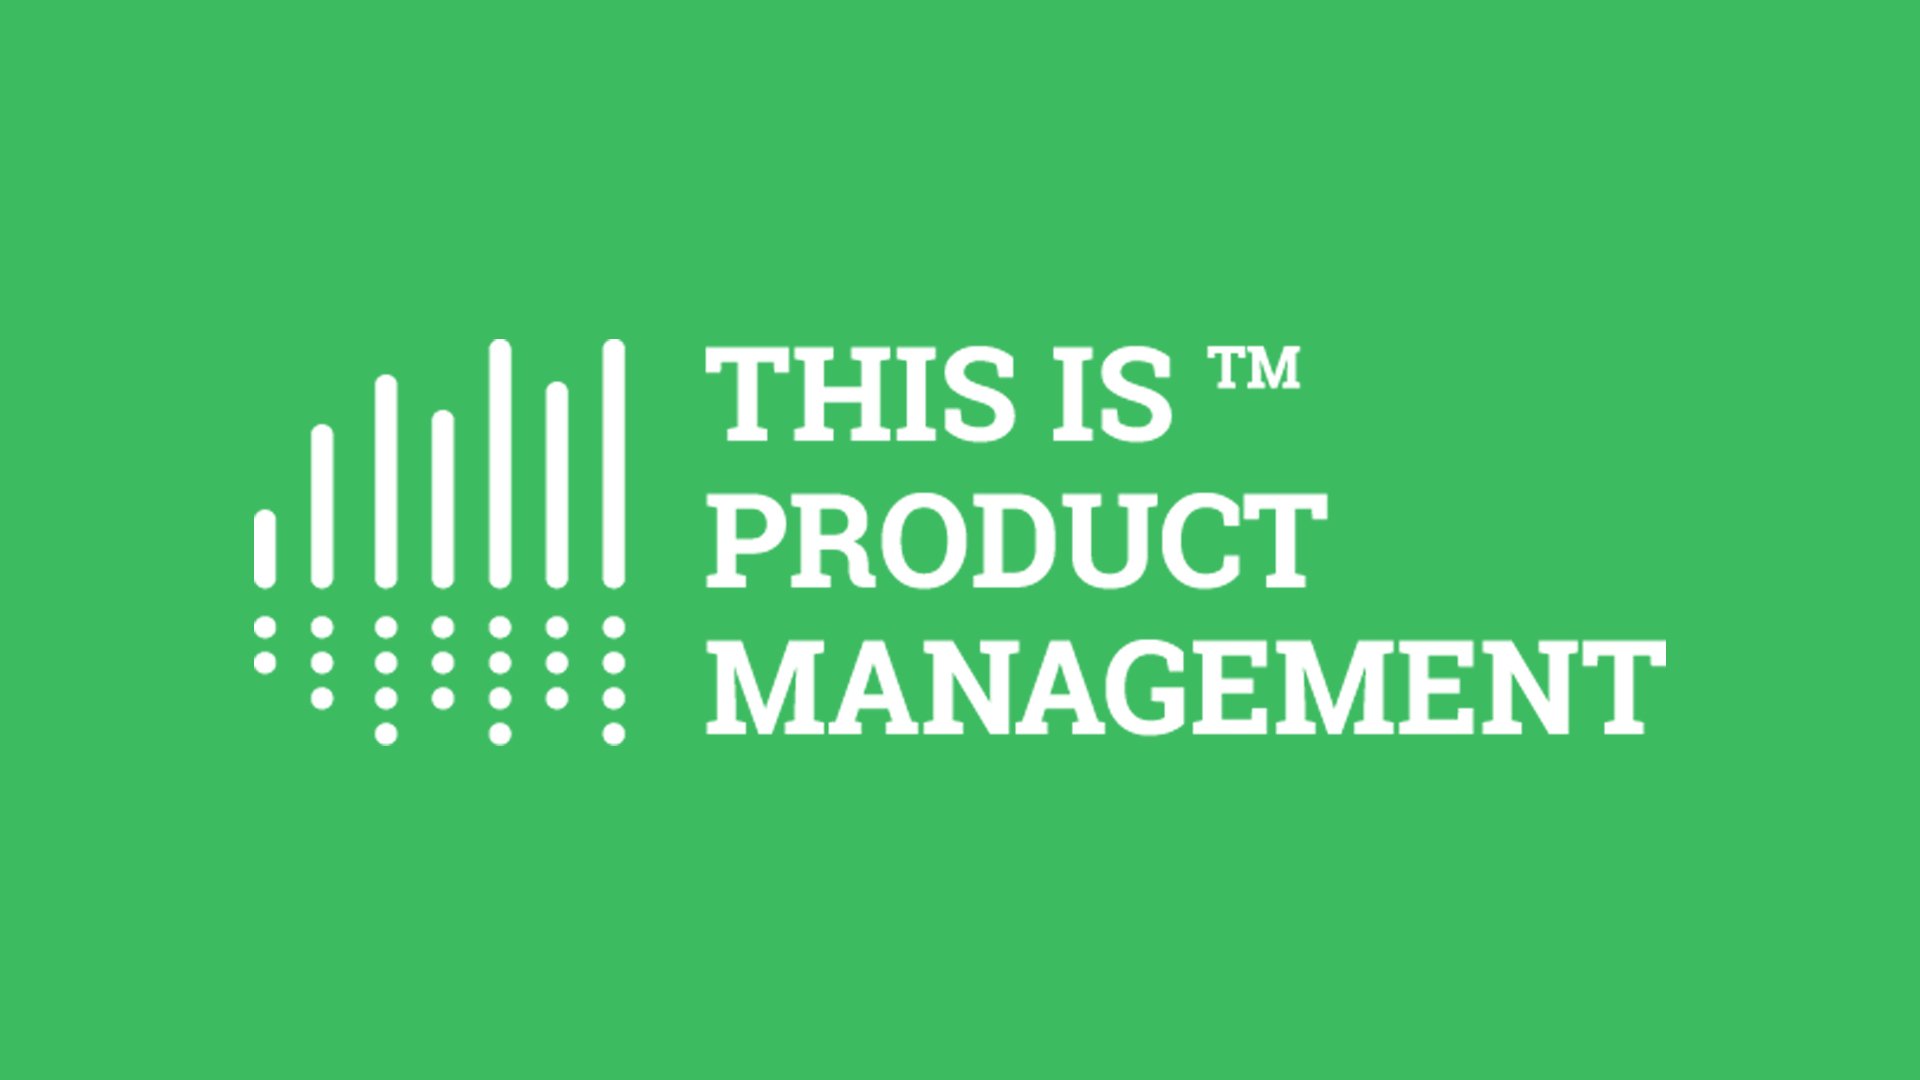 Accelerating Change is Product Management